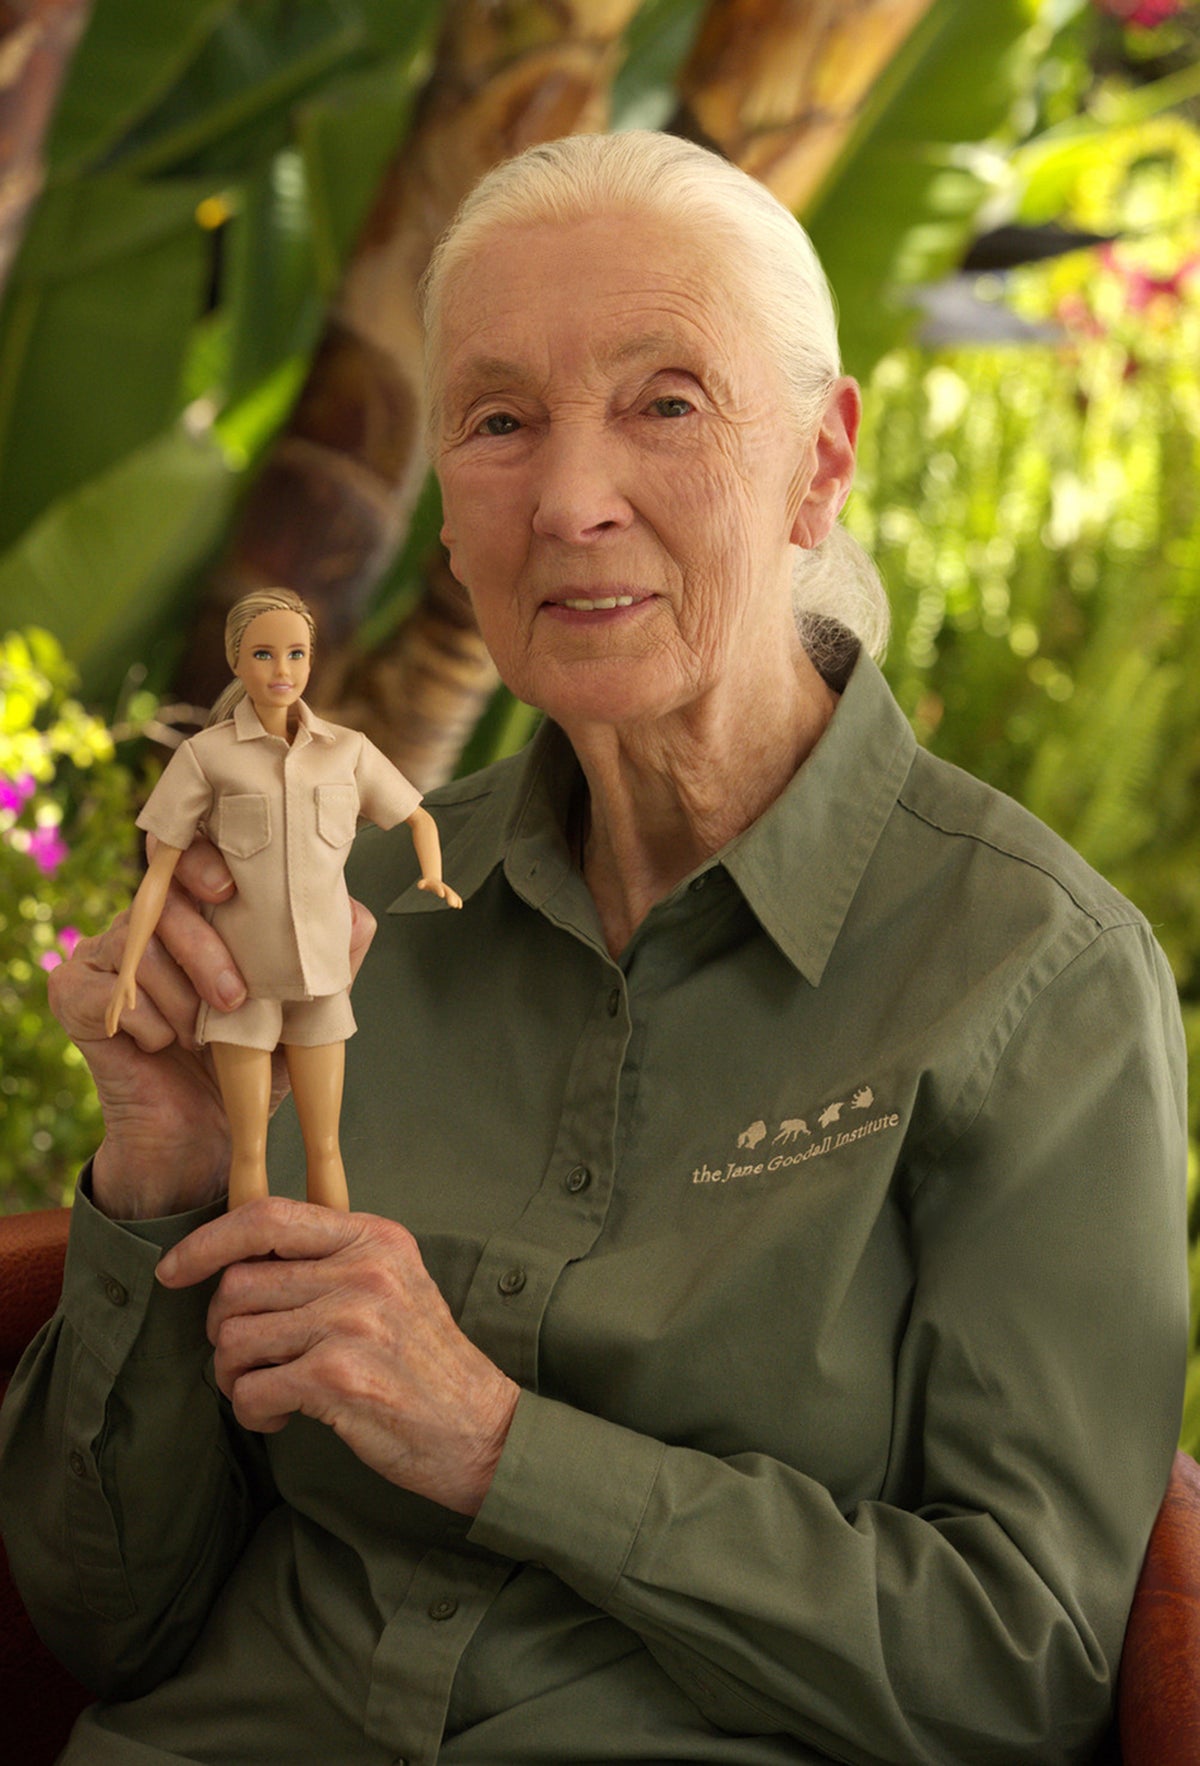 Barbie unveils new Dr Jane Goodall doll in honour of the conservationist